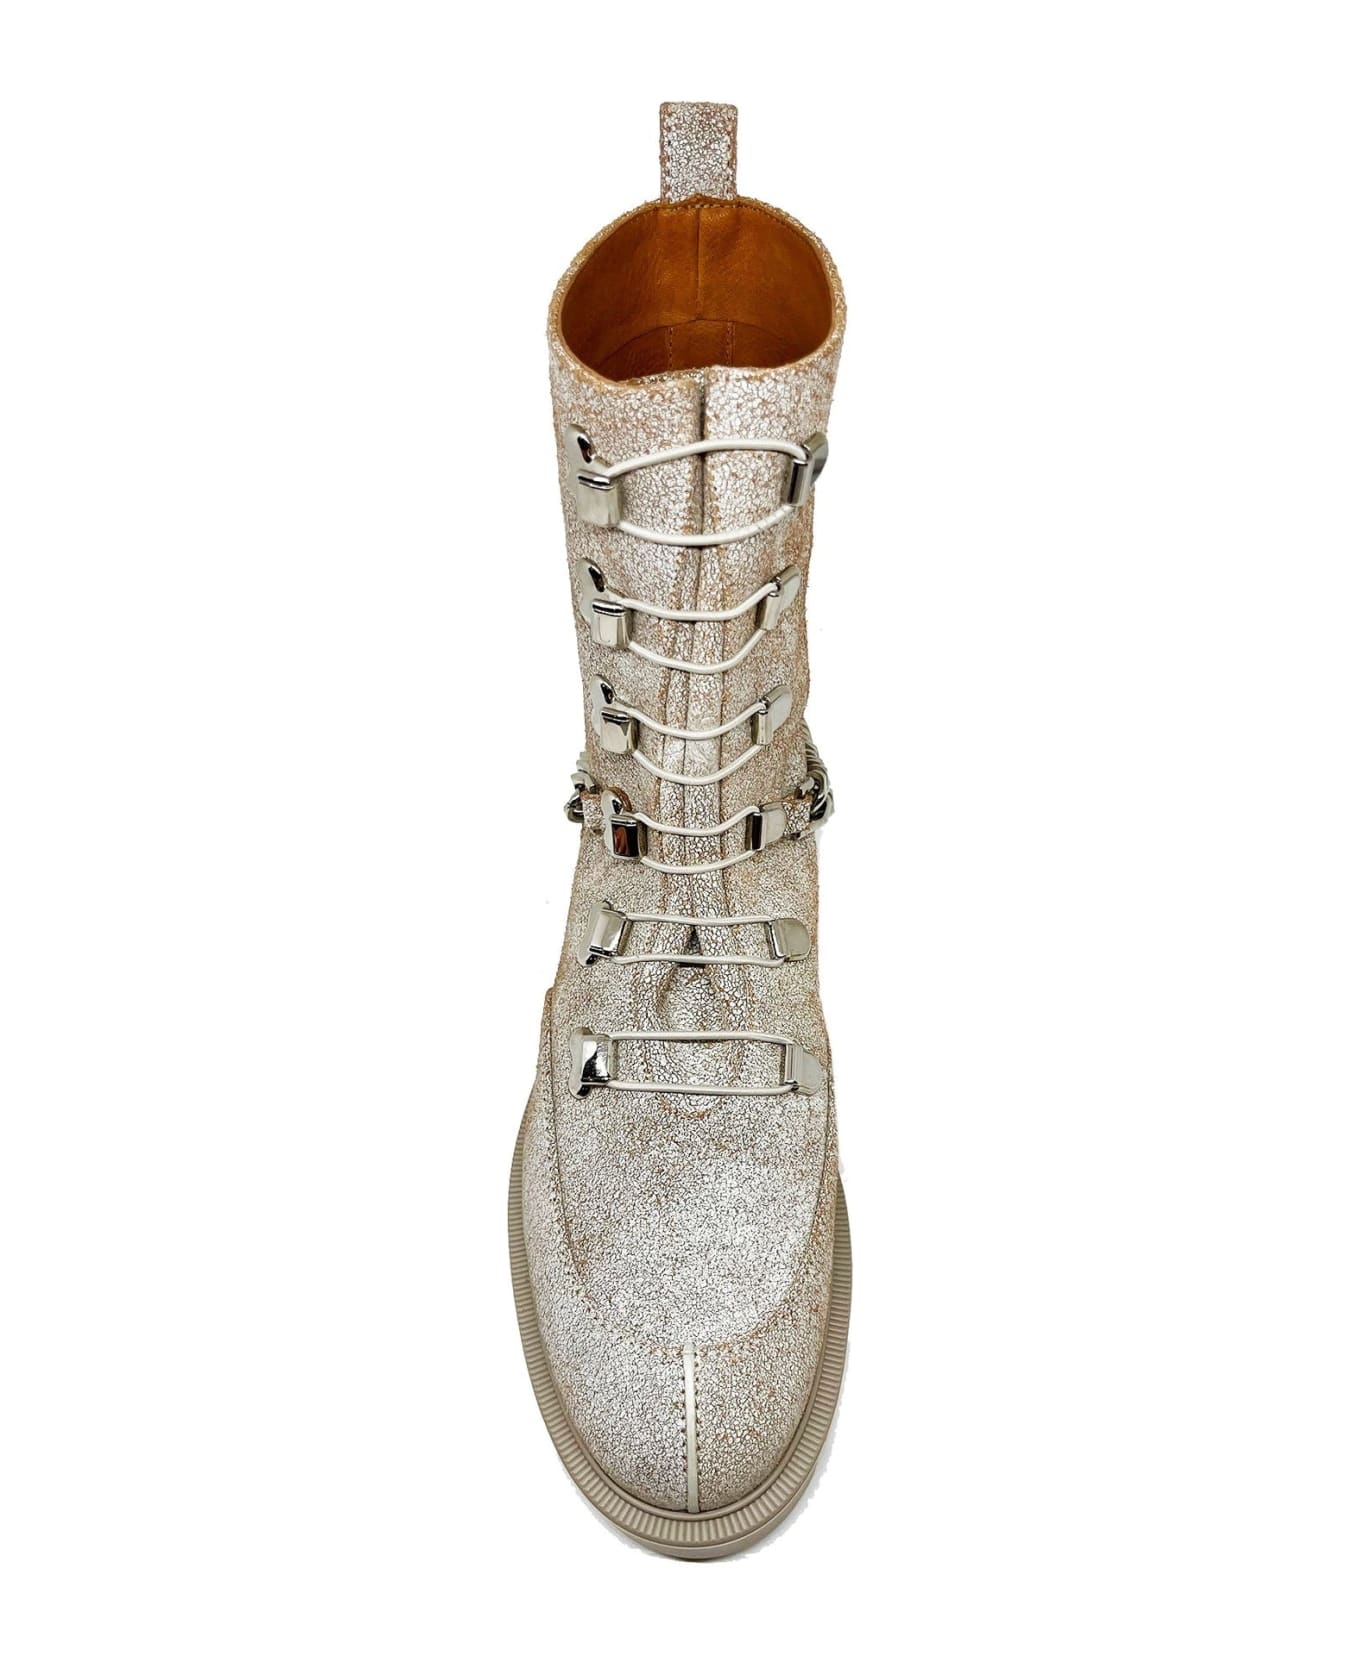 Christian Louboutin Leather Boots - Beige